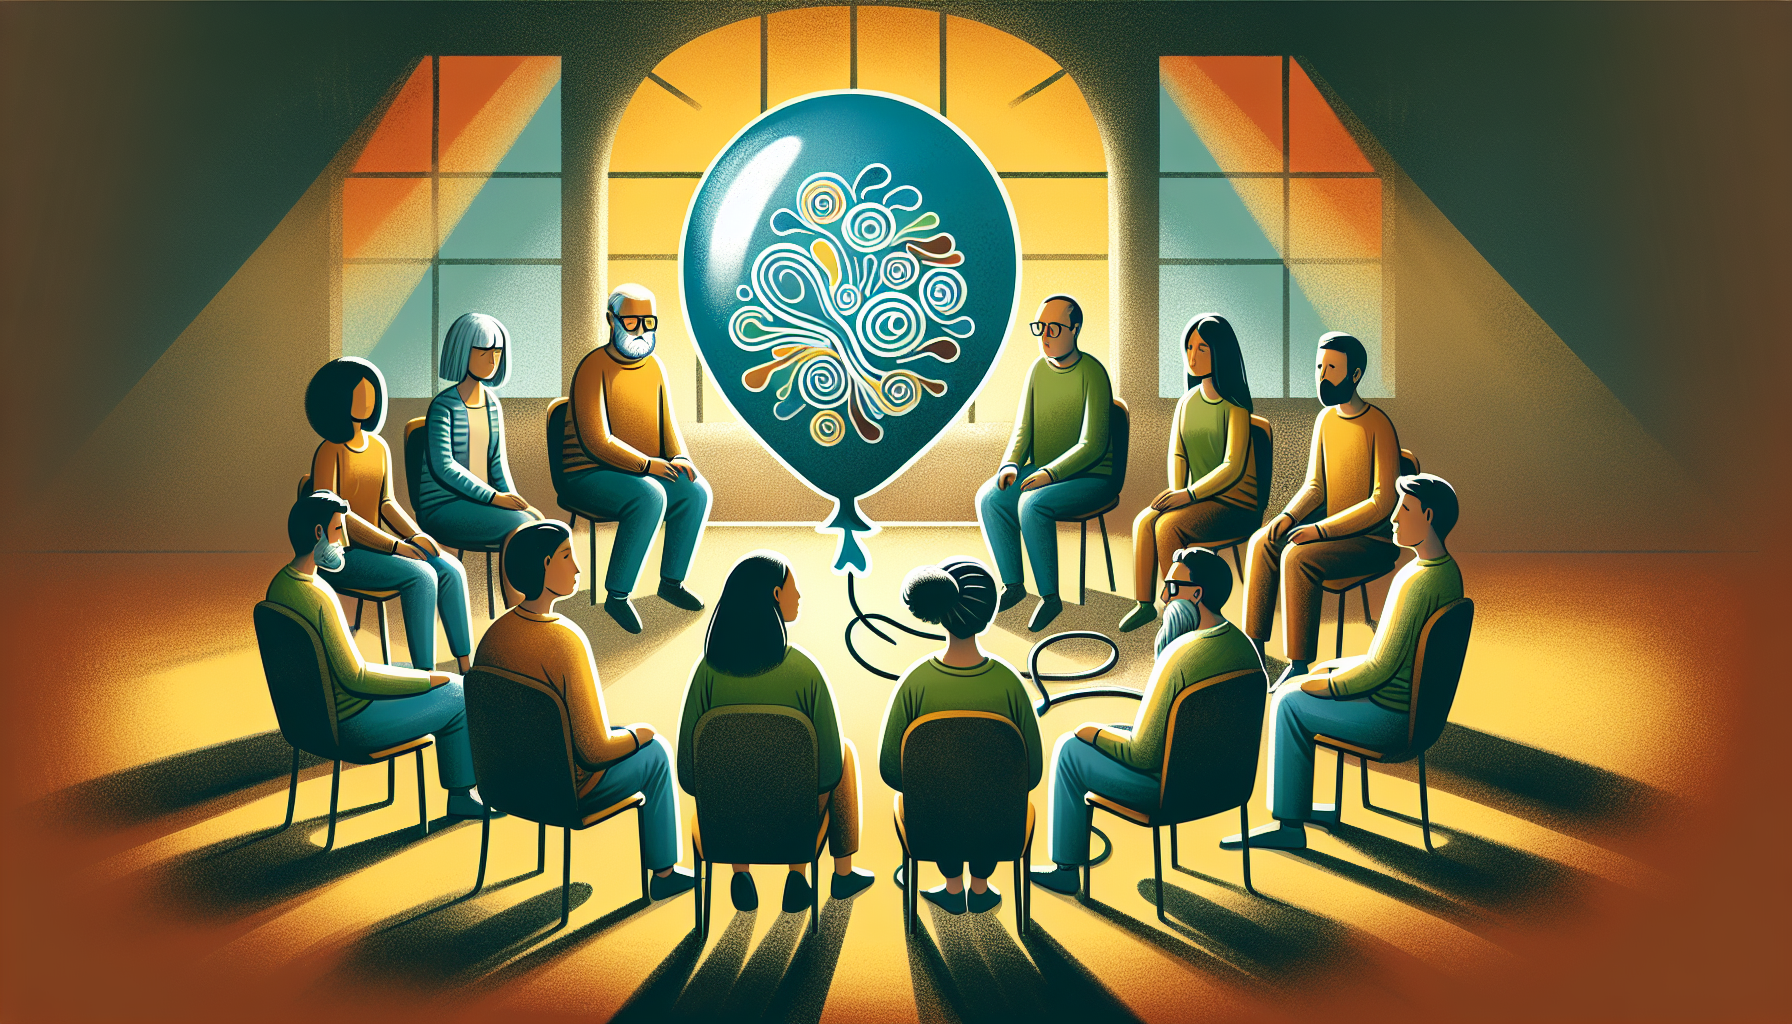 Illustration of a support group meeting for addiction treatment